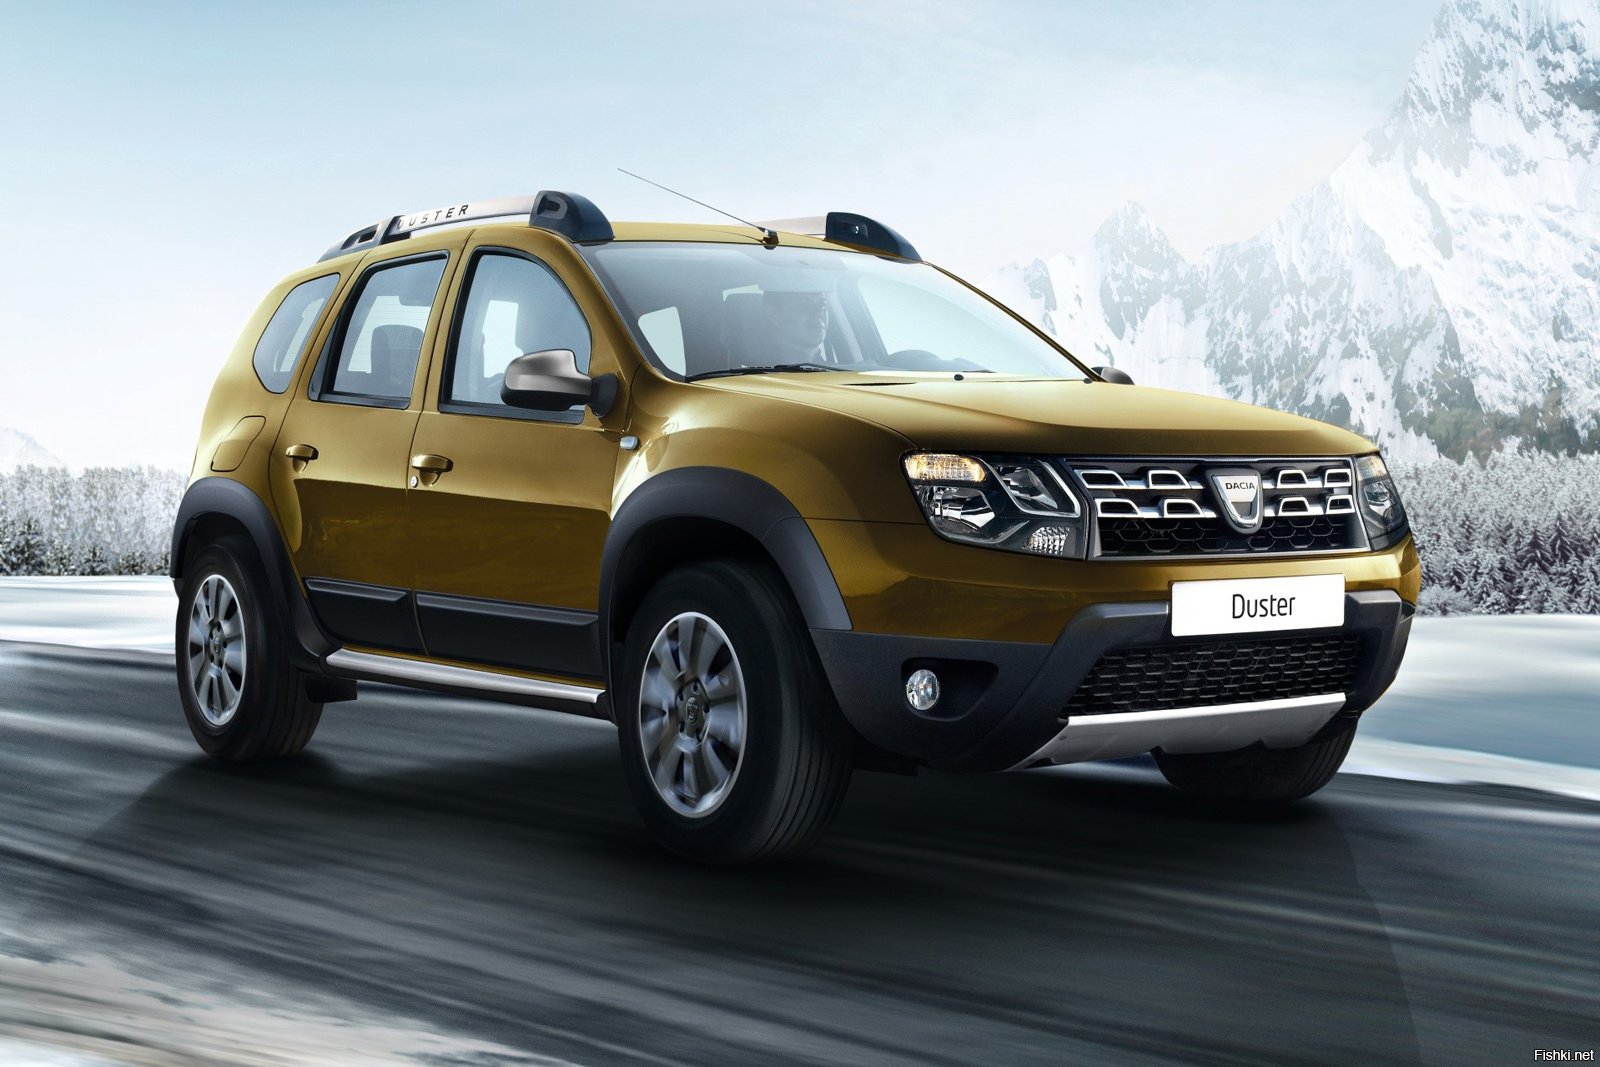 Дастер 4wd 2.0. Renault Duster. Renault Duster 2018. Renault Dacia Duster. Рено Дастер 2016.